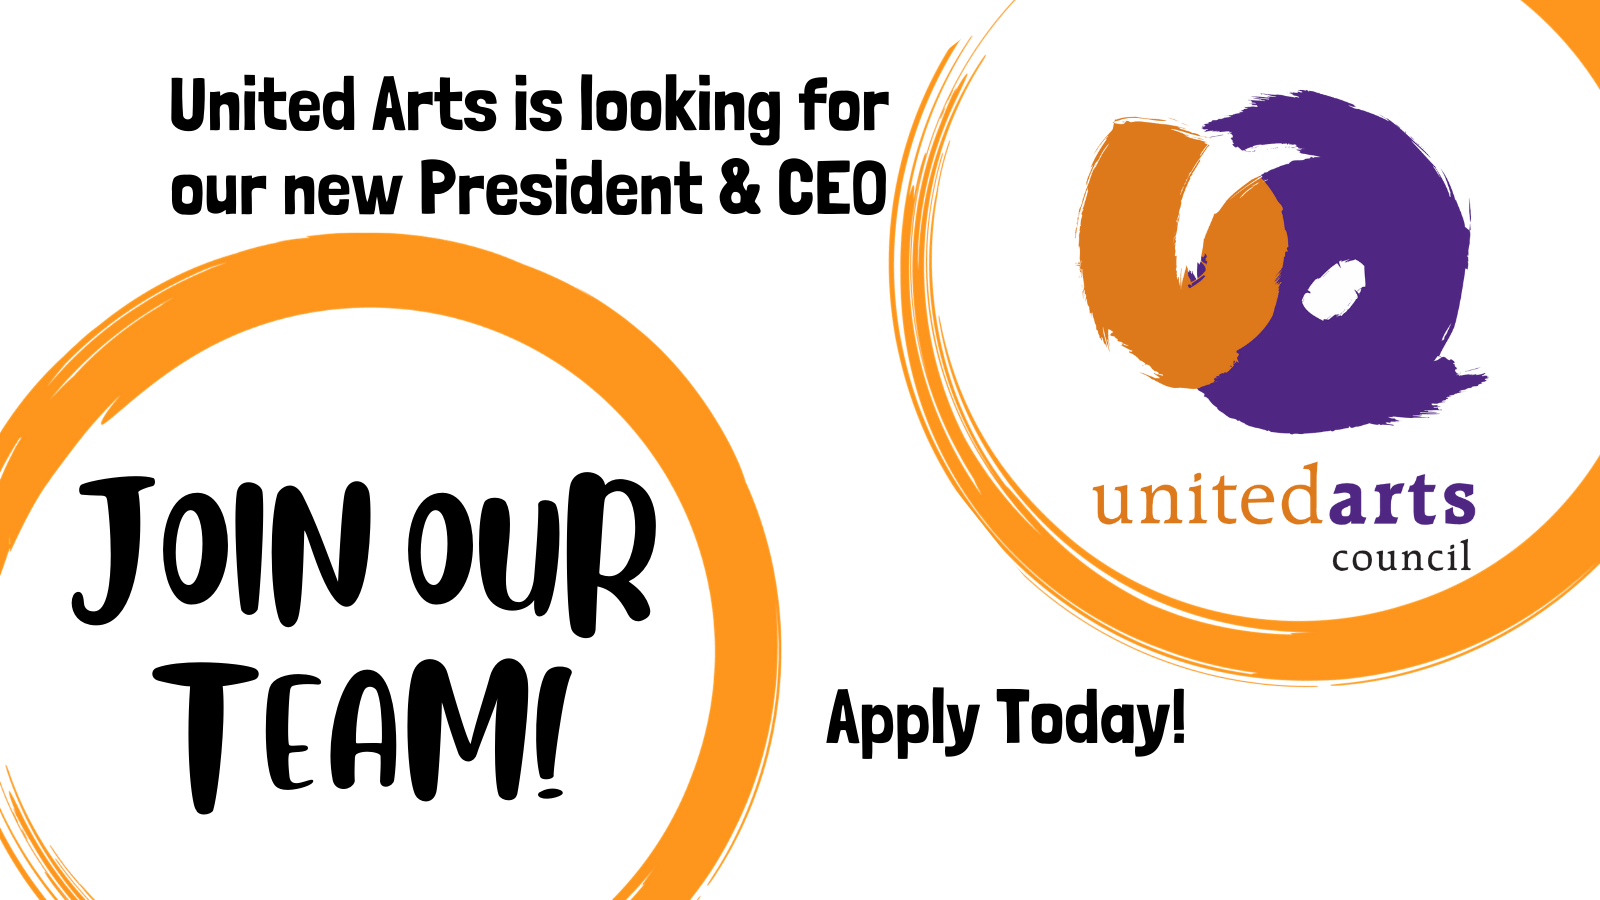 Join our Team United Arts is Looking for a new President/CEO